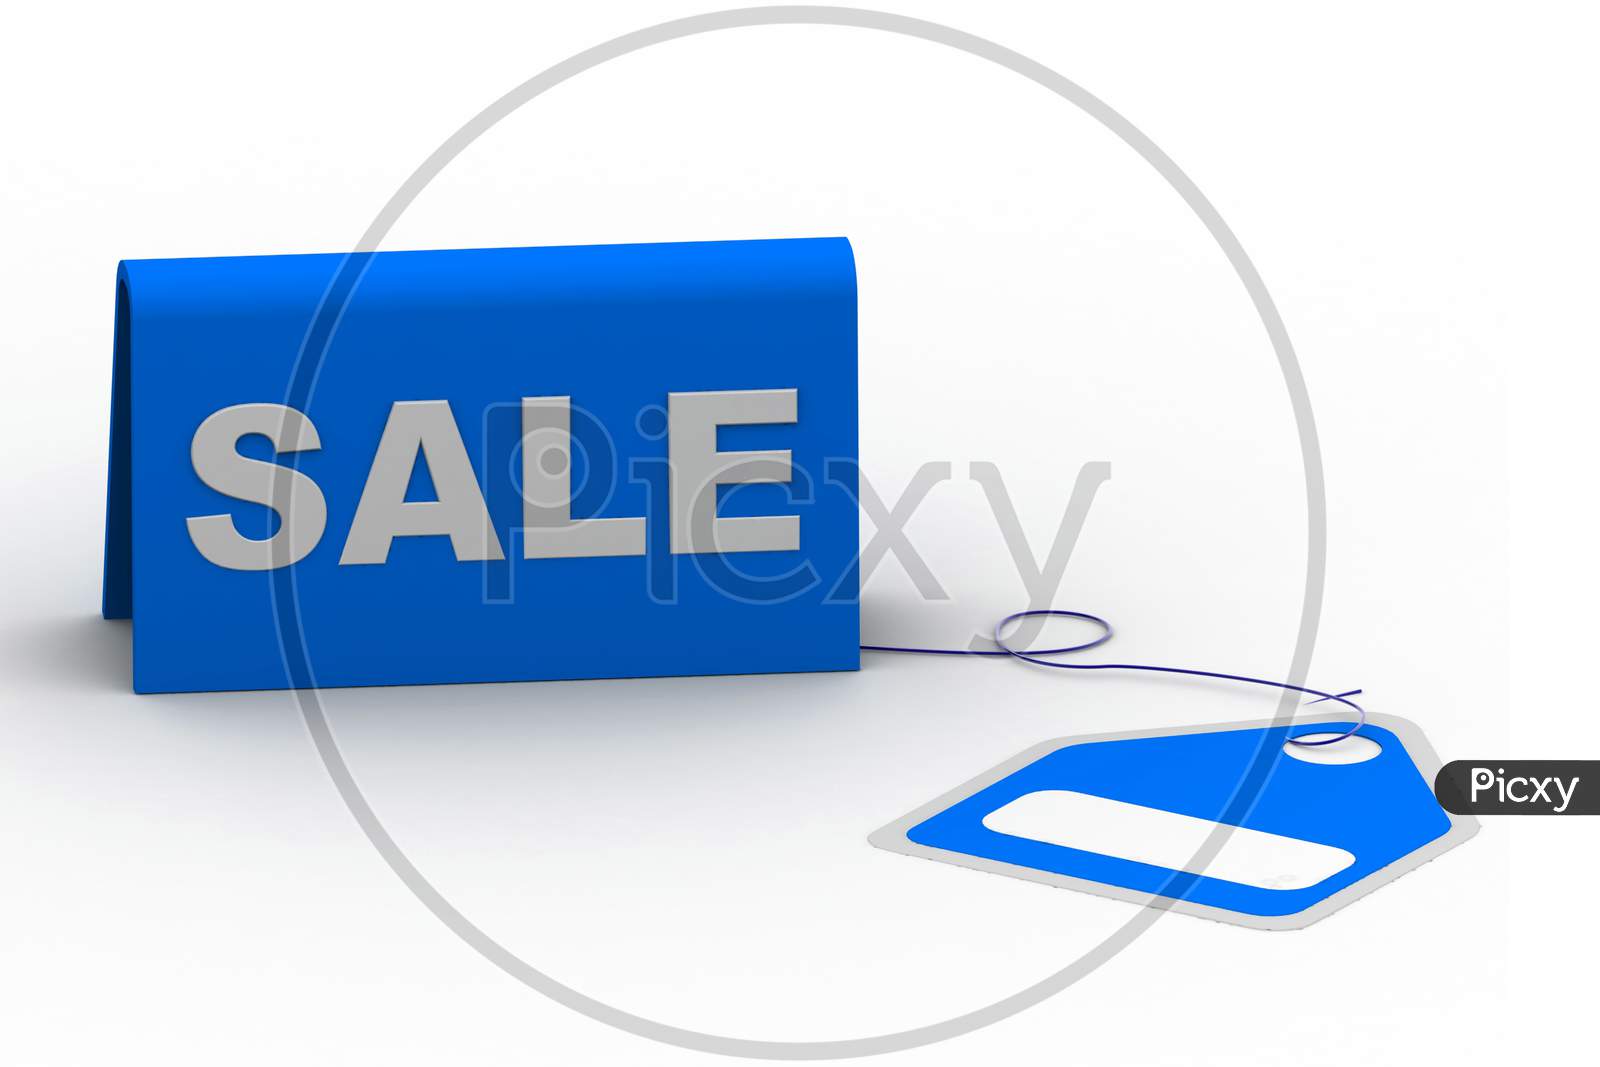 Sale Board with Tag Isolated with White Background